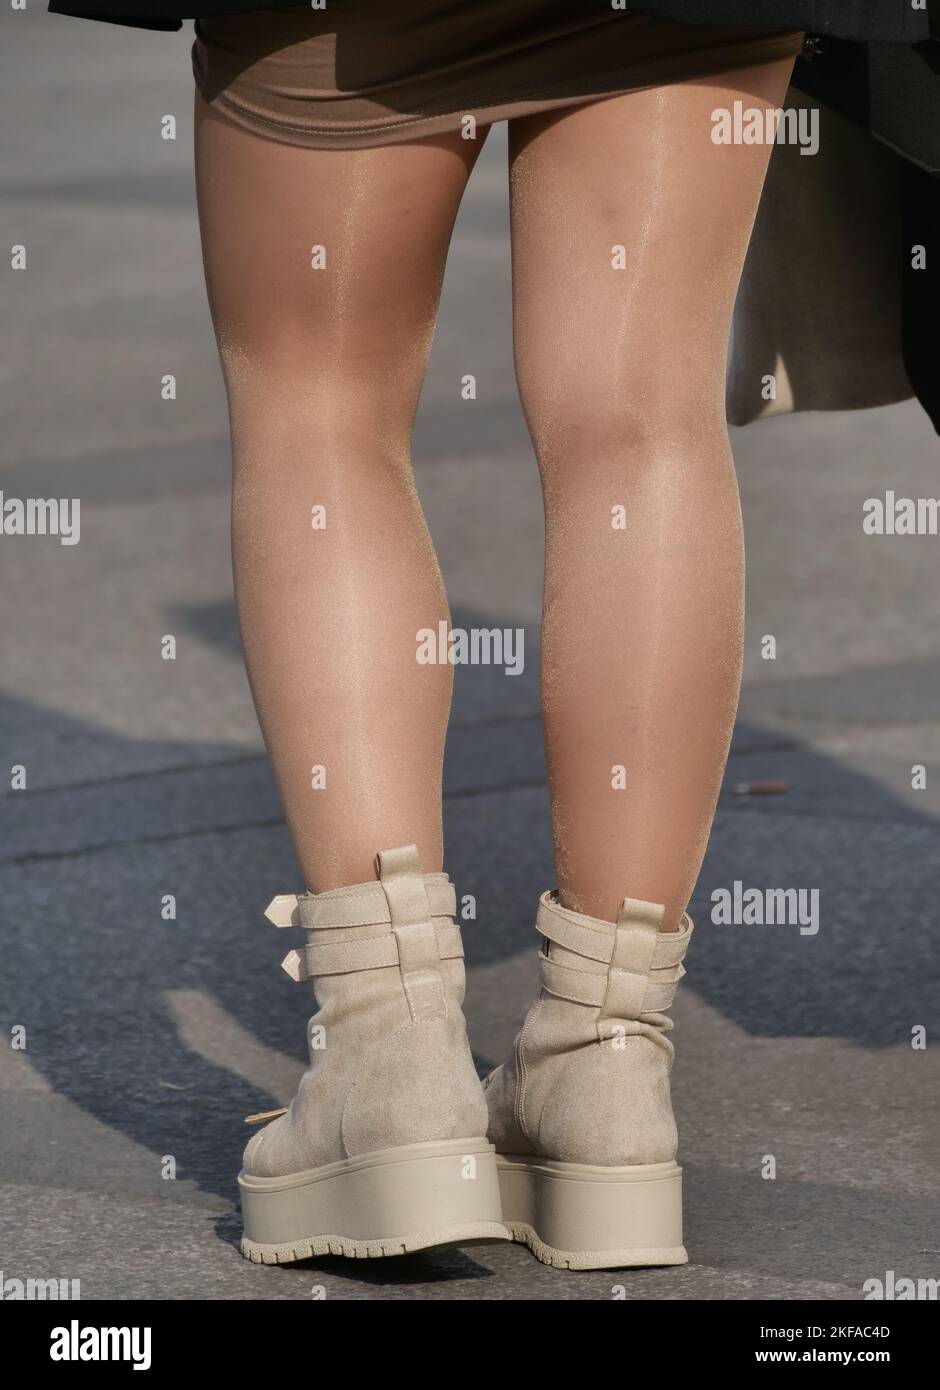 Girl in miniskirt, mini boots and tan pantyhose in Duomo square, Milan, Lombardy, Italy Stock Photo